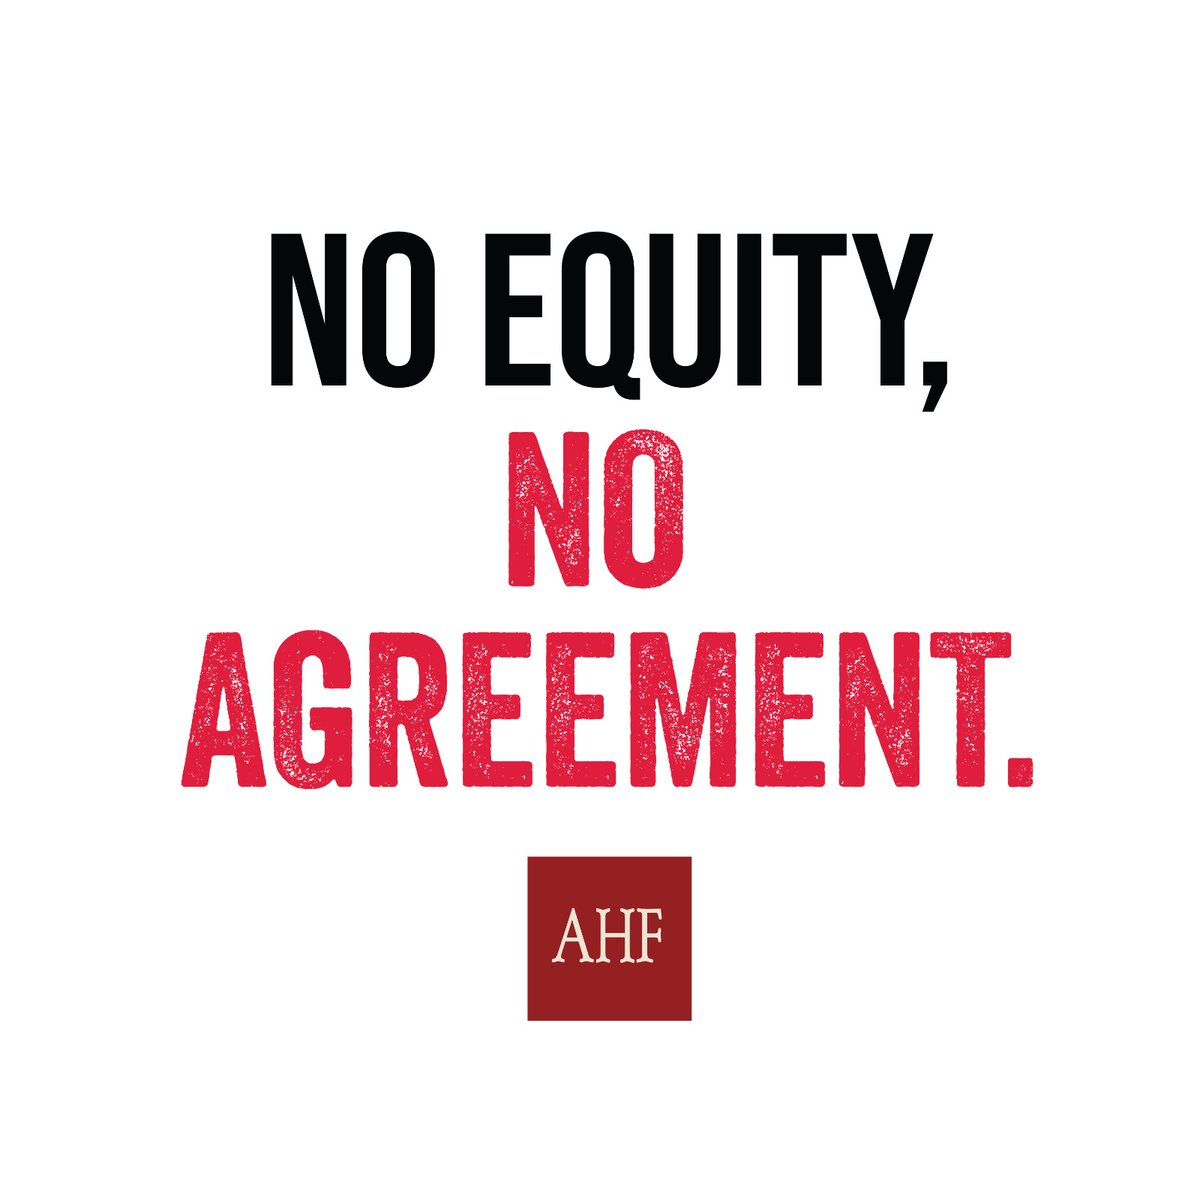 With the world's attention focused on the final pandemic agreement talks, let's not overlook the pressing concerns raised by @ahfkenya and @AYARHEP_KENYA. Ensuring equity, accountability, and CSO involvement is paramount. #HealthEquityNow #StopPharmaGreed